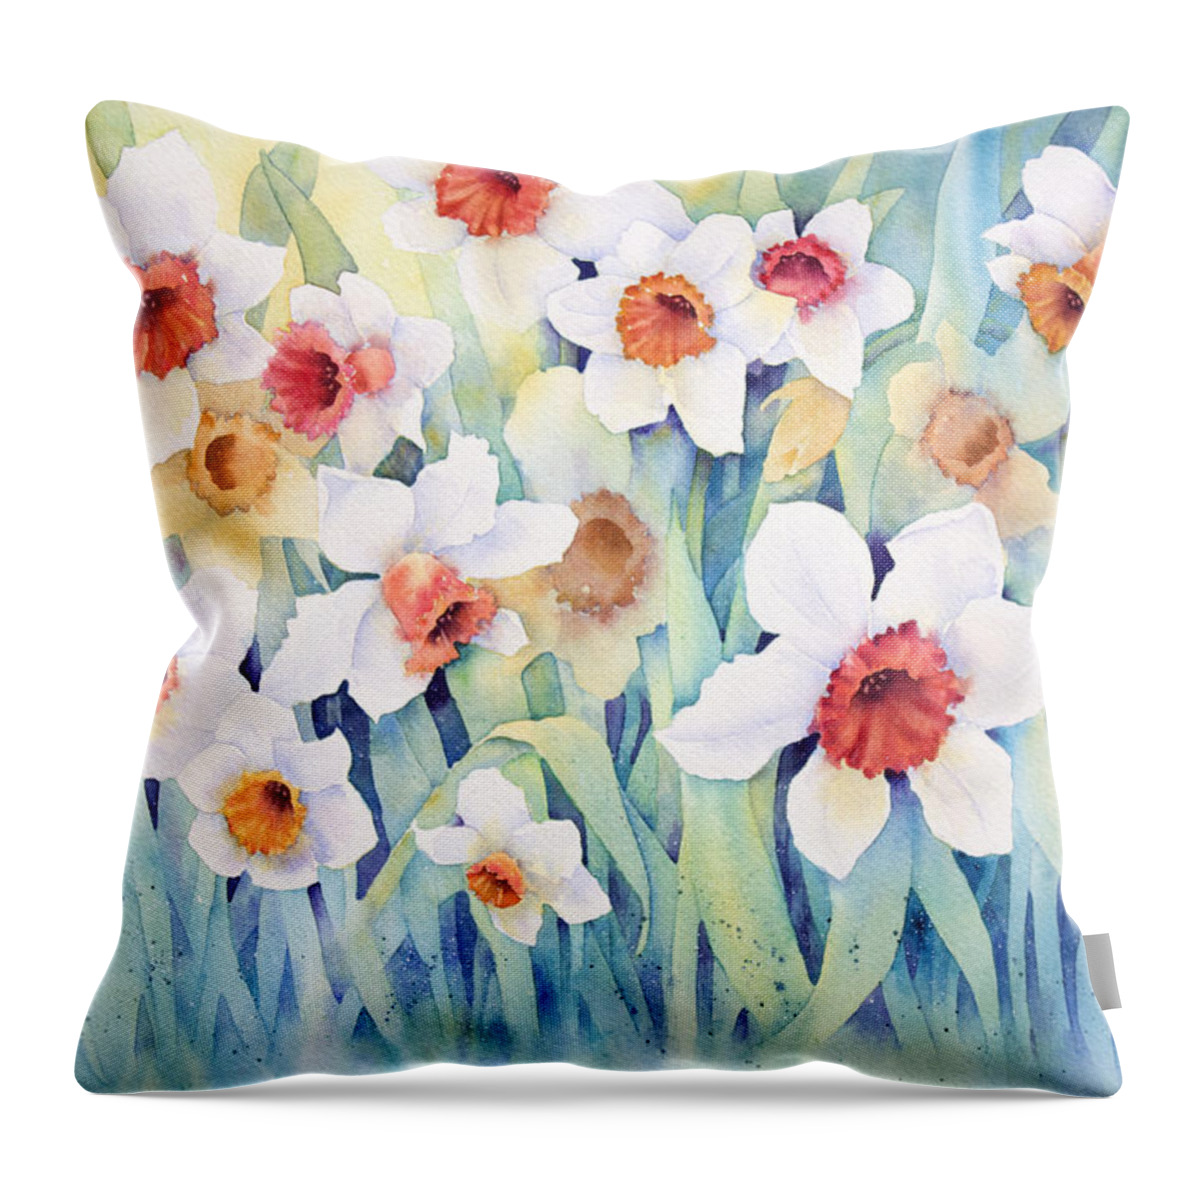 Giclee Throw Pillow featuring the painting Welcome Spring by Lisa Vincent